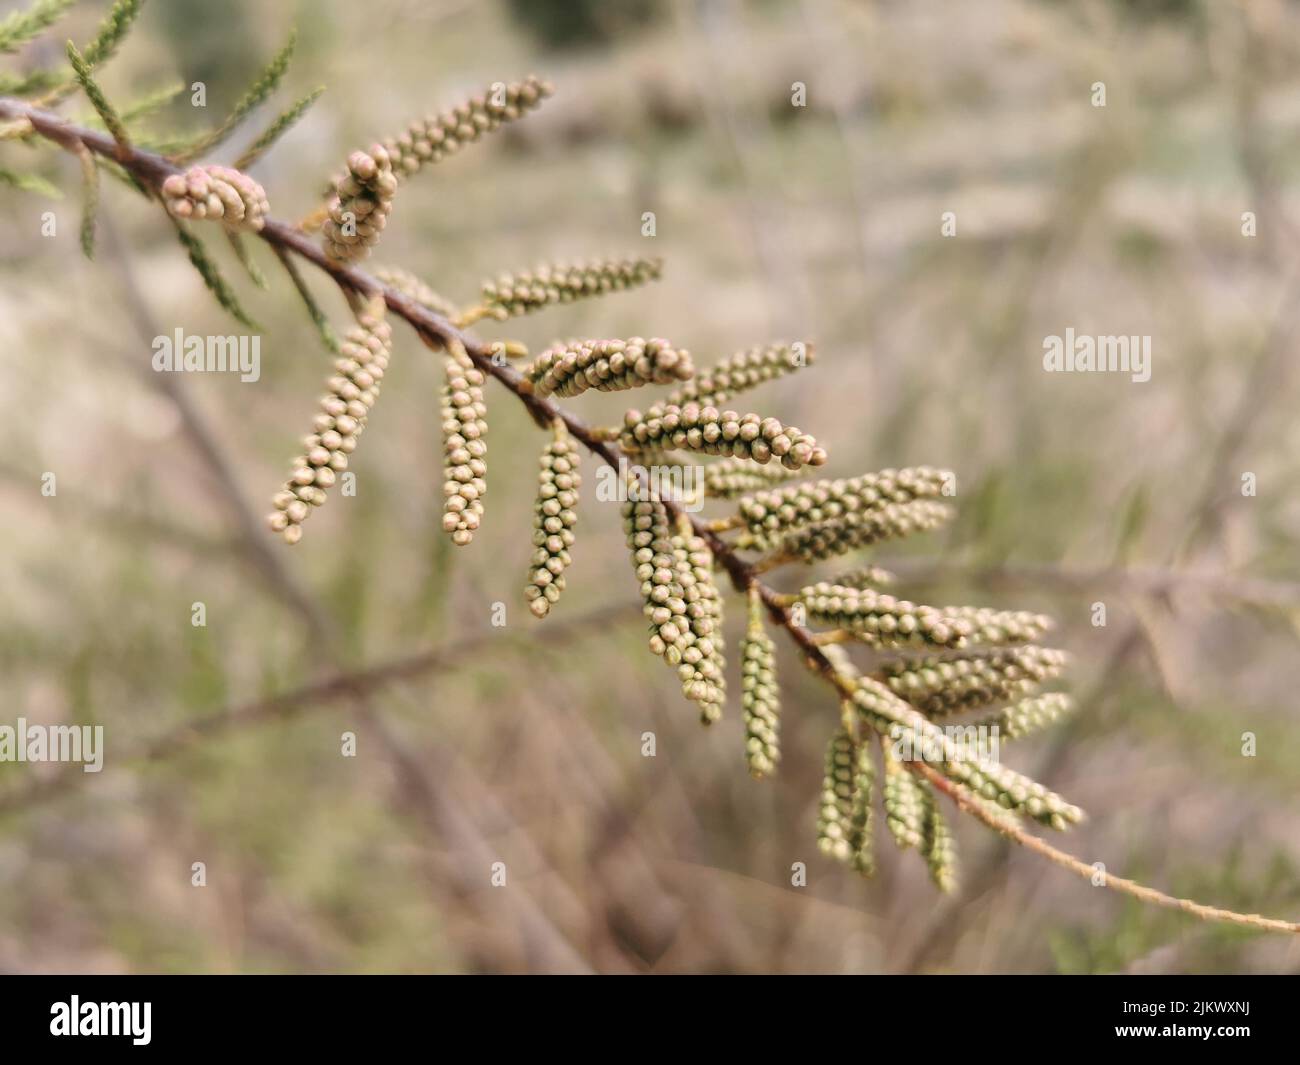 A closeup of comber plant on a long stem against a blurry background of greenery Stock Photo